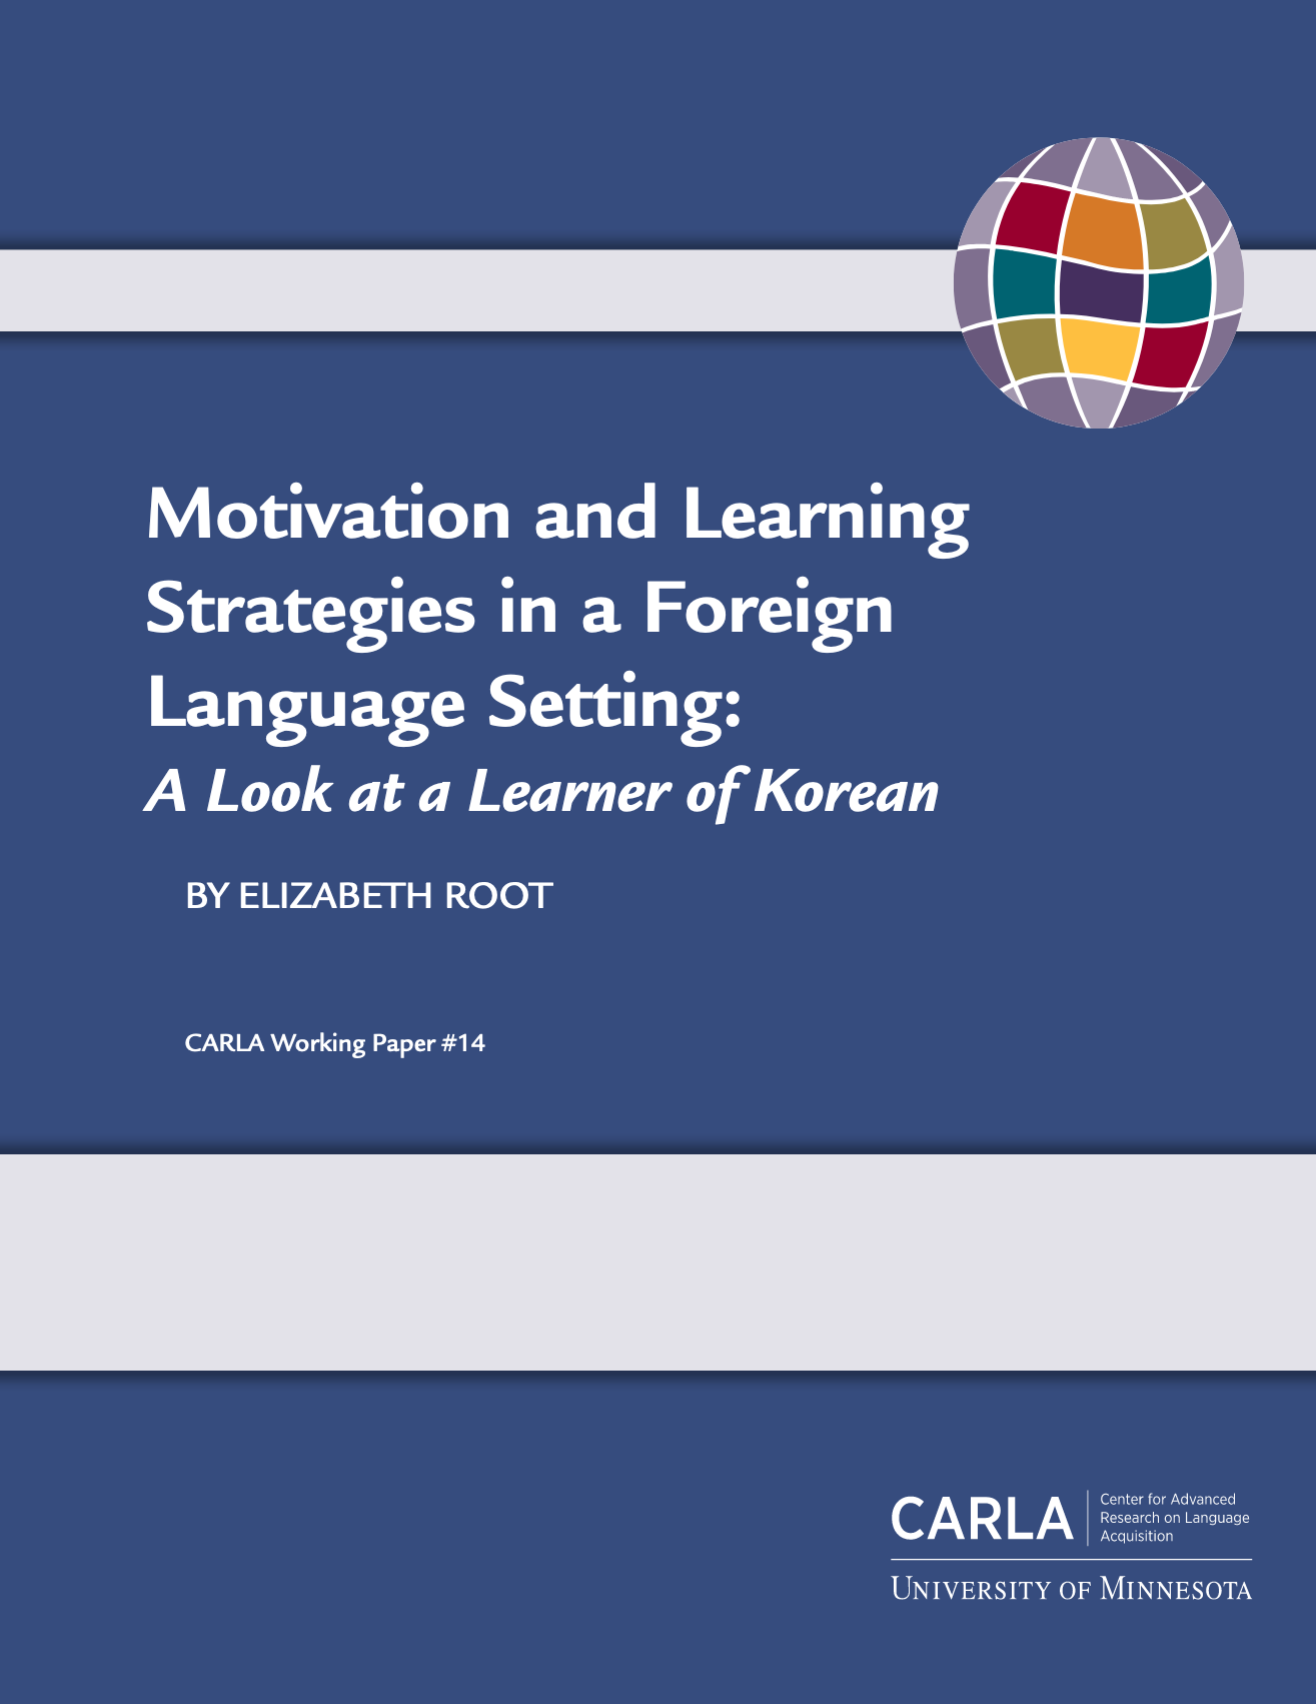 Motivation and Learning Strategies: Korean